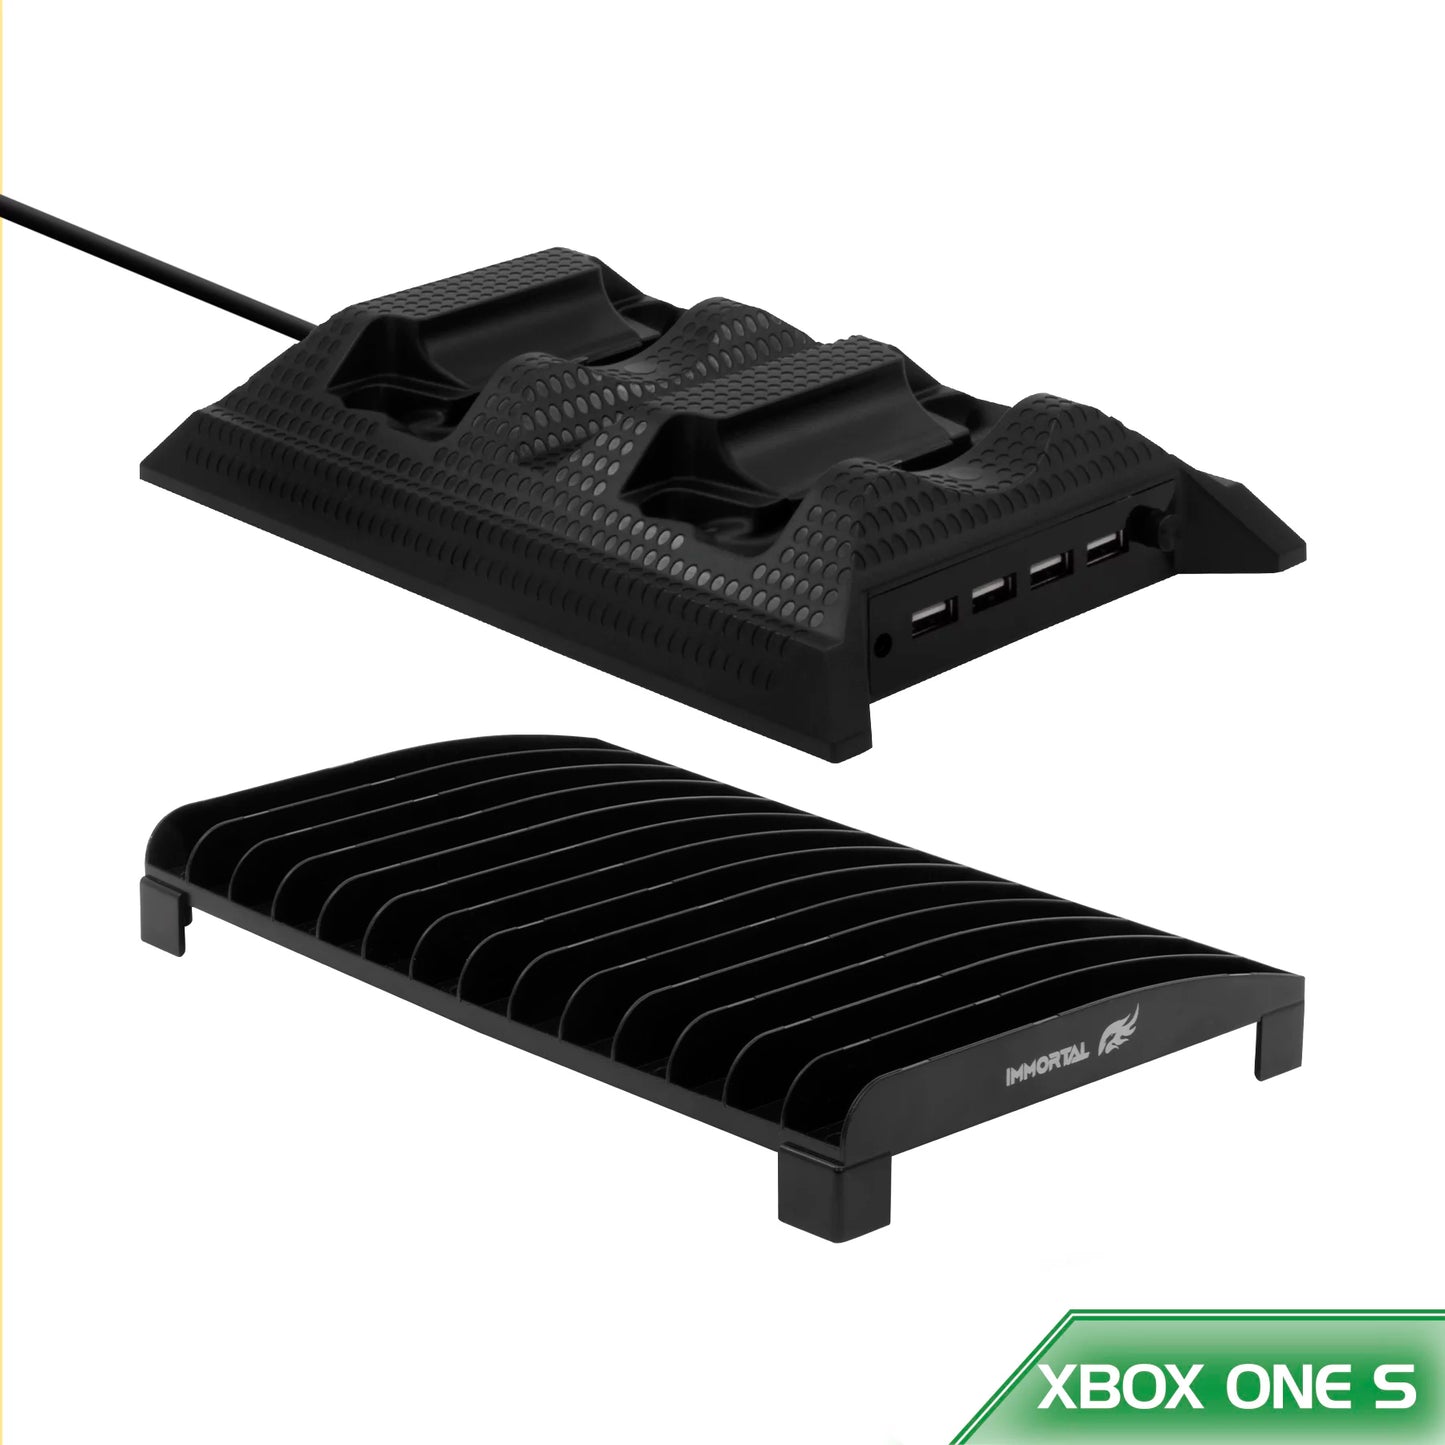 IMGTXB Cooling Base and Charging Station for Xbox One S